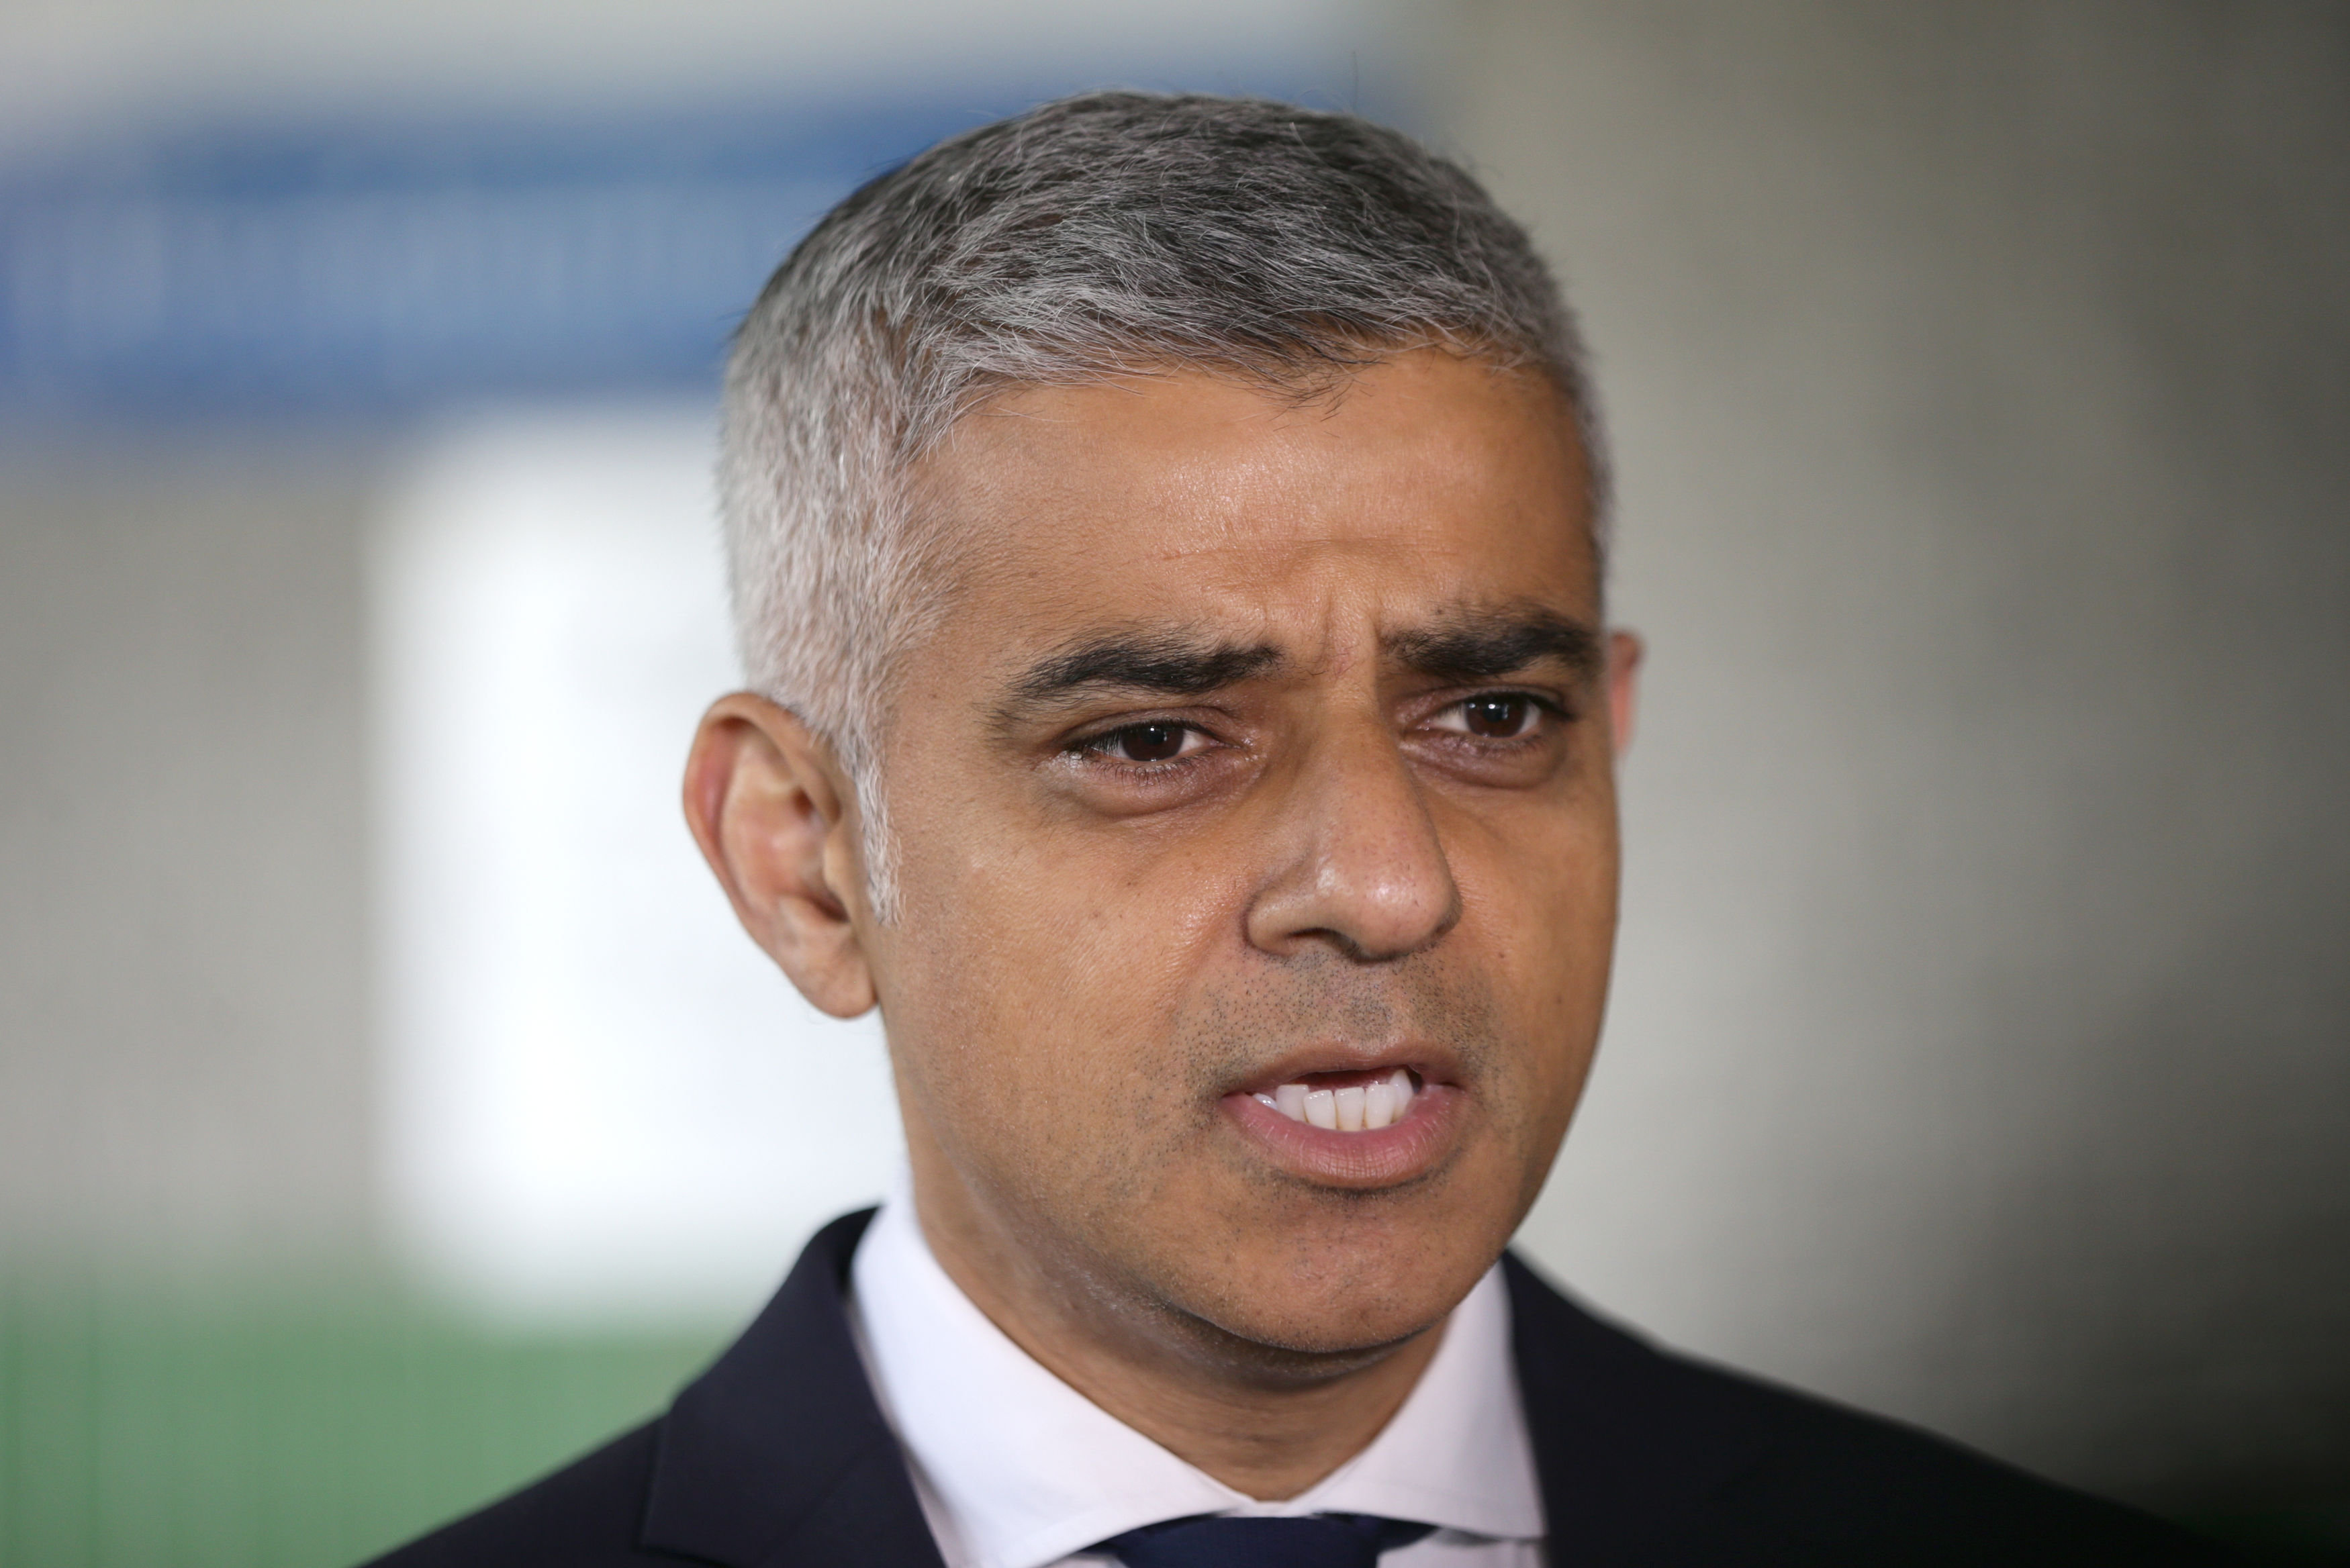 <strong>Sadiq Khan said the government must provide additional funding to tackle homelessness&nbsp;</strong>